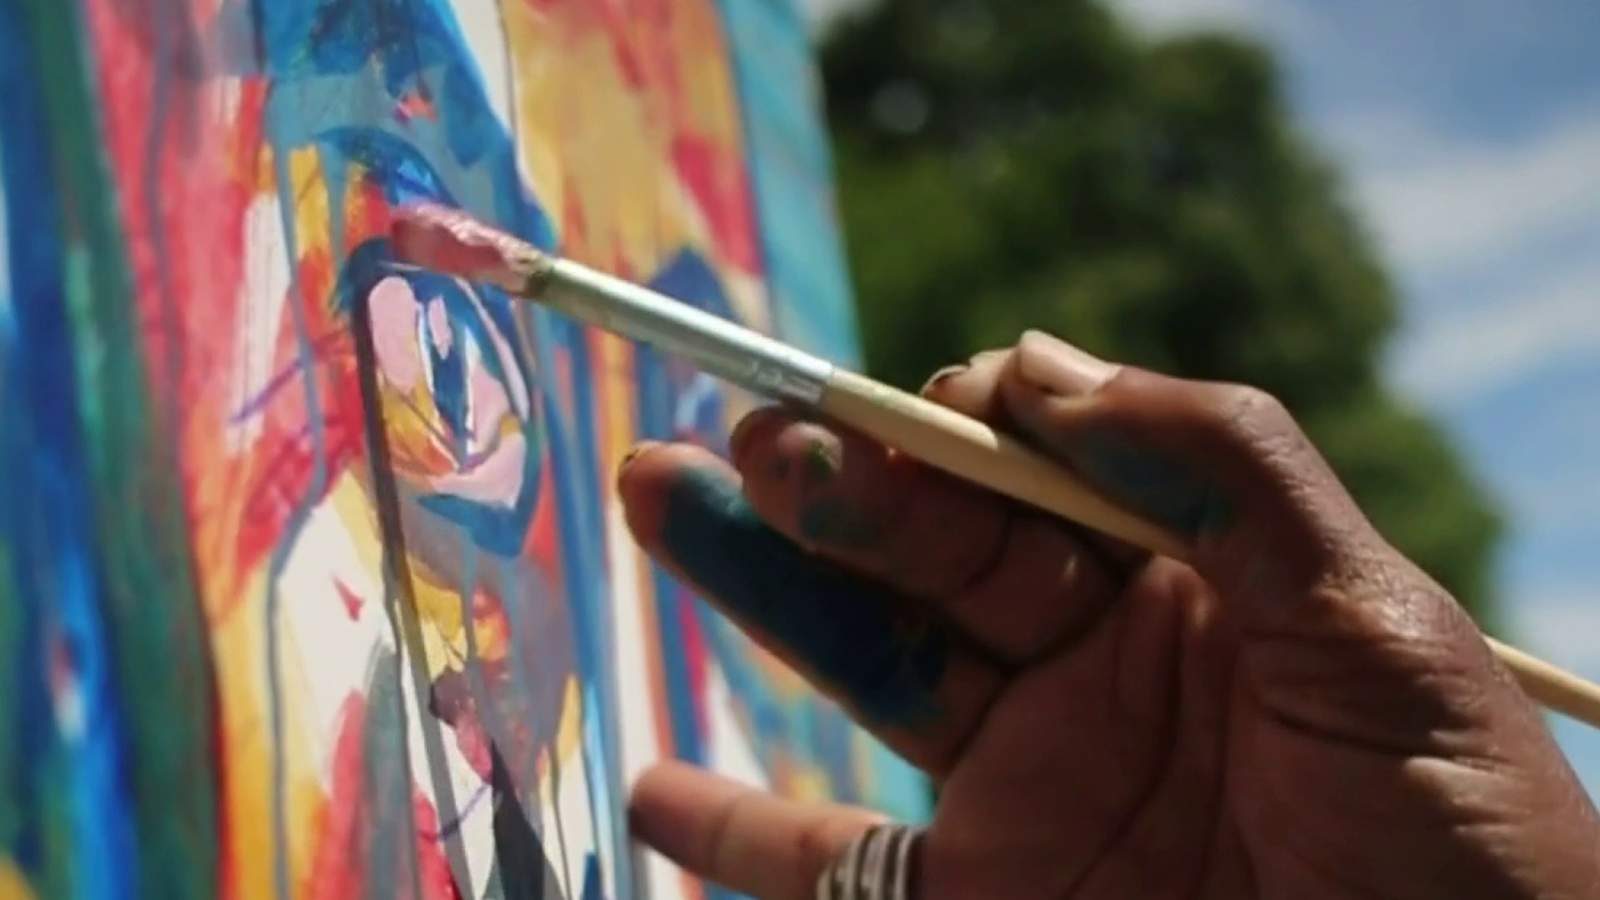 Meet the Artist On The River: Detroit artist has been visiting the riverfront to paint for almost 30 years